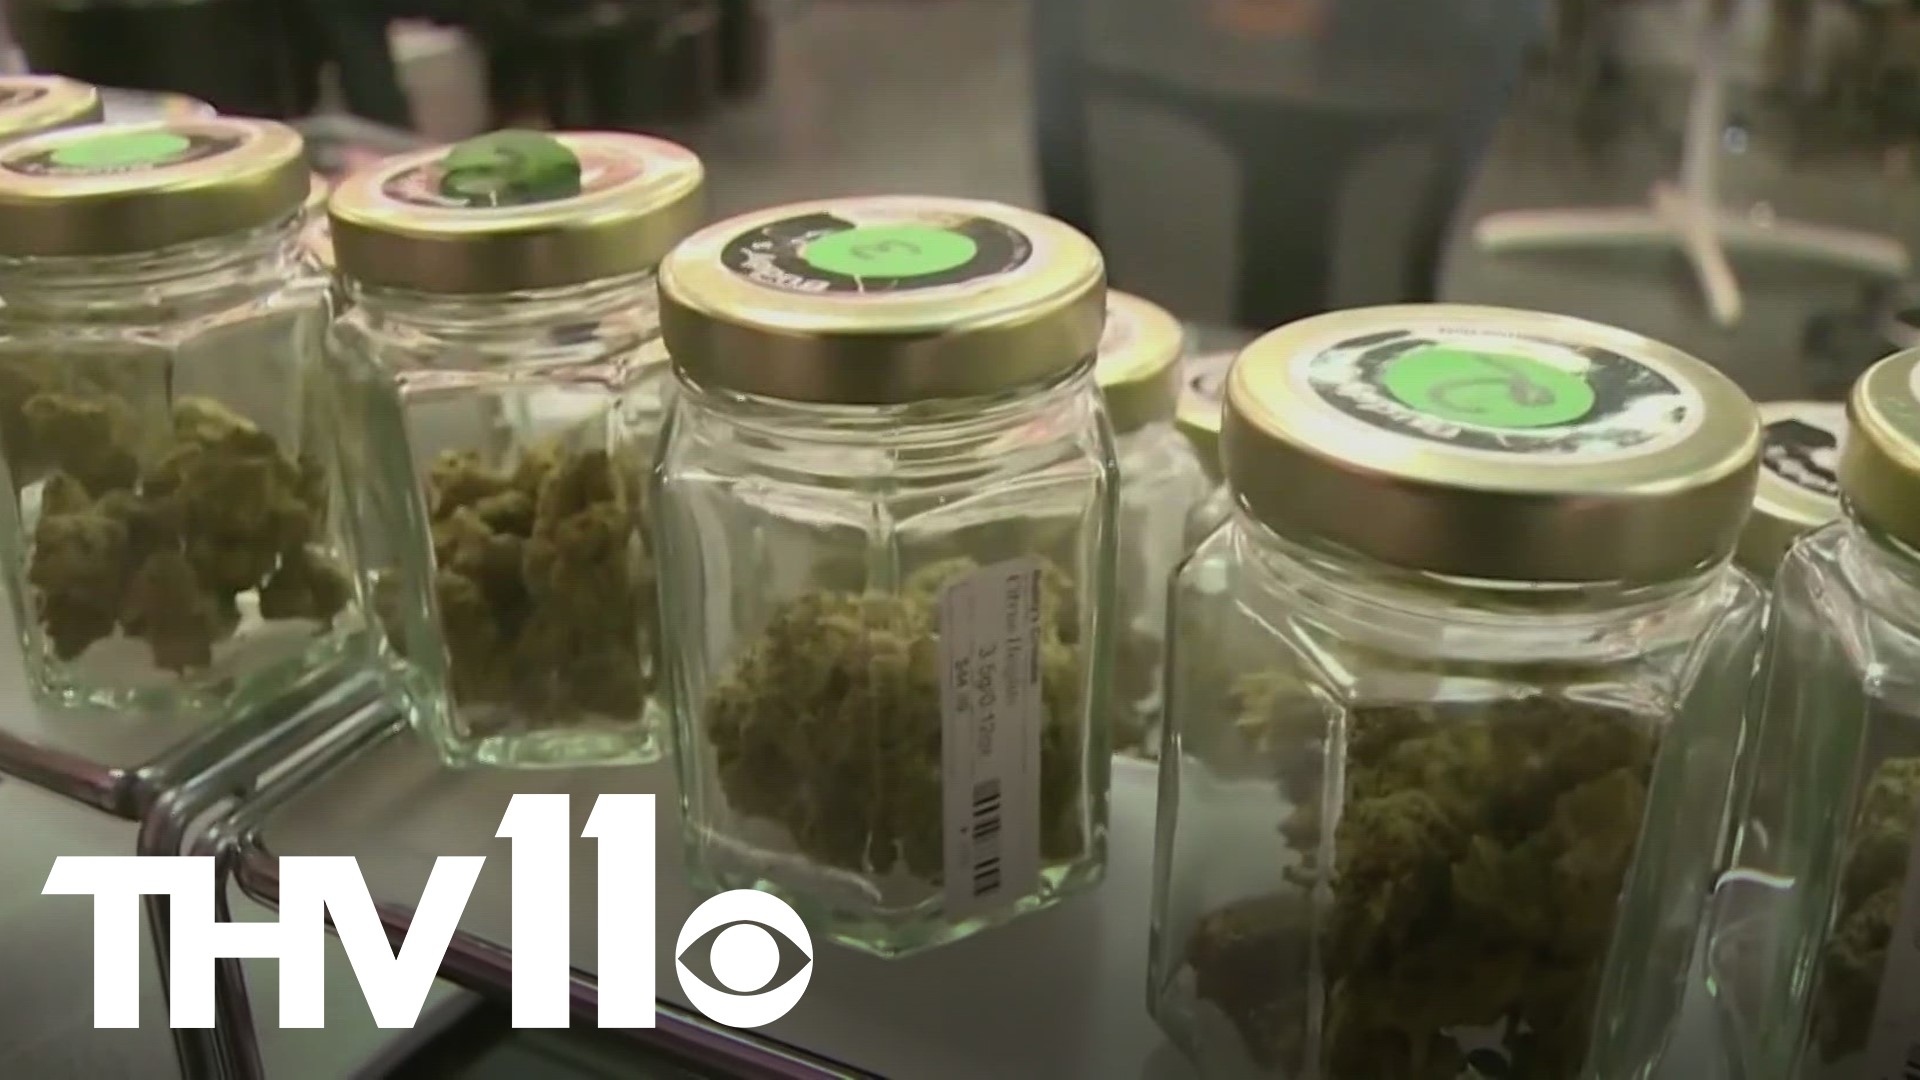 We're taking a look at how the medical marijuana industry has grown during the last four years and why cannabis could be coming to a crossroads.